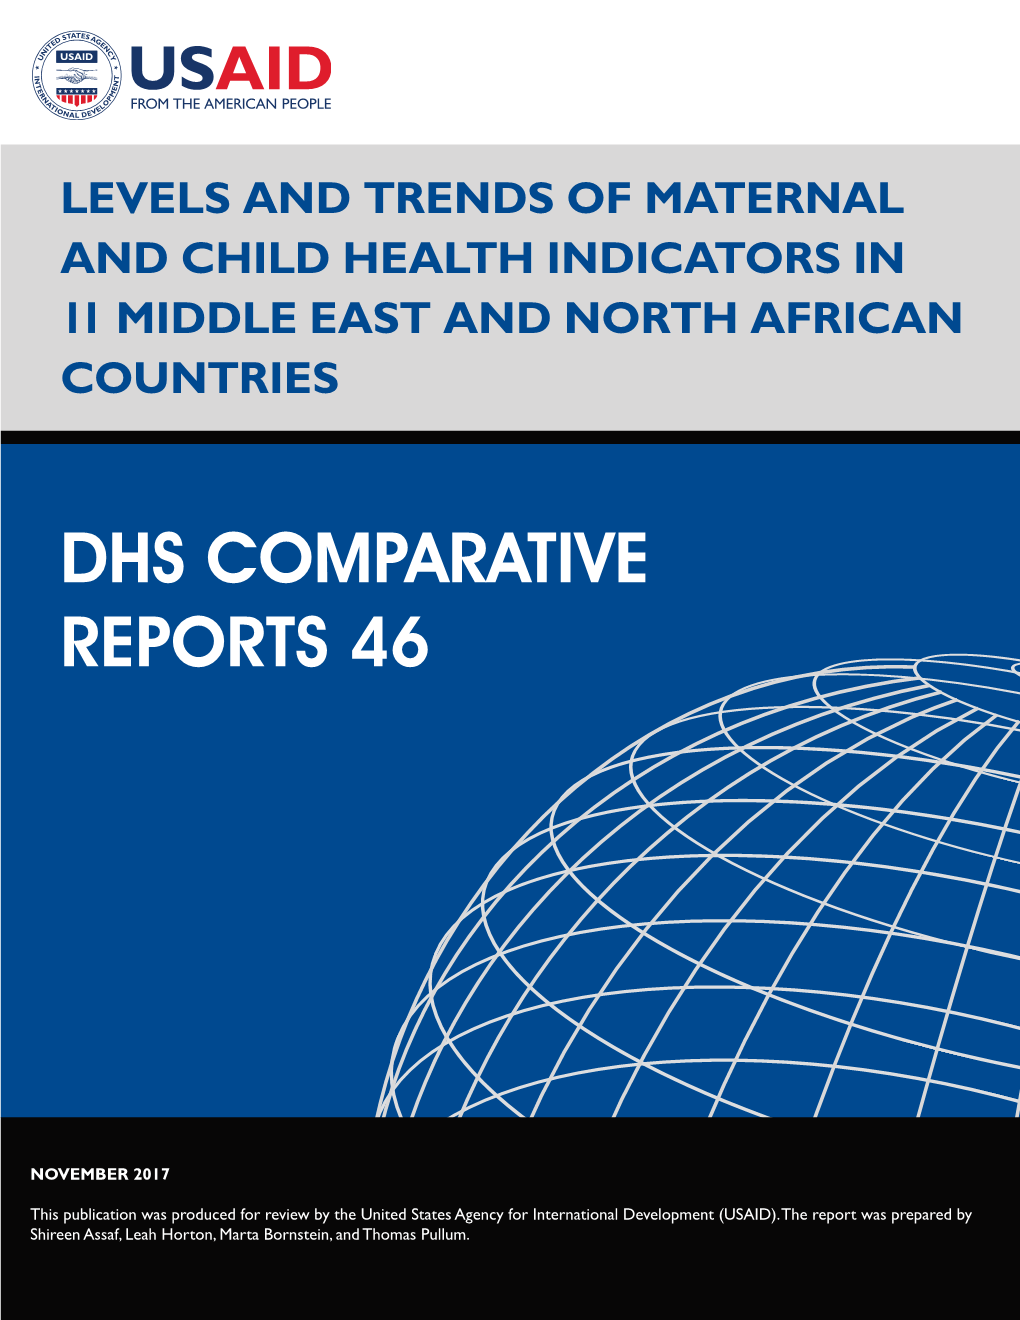 Levels and Trends of Maternal and Child Health Indicators in 11 Middle East and North African Countries Levels and Trends of Maternal and Child Health Indicators